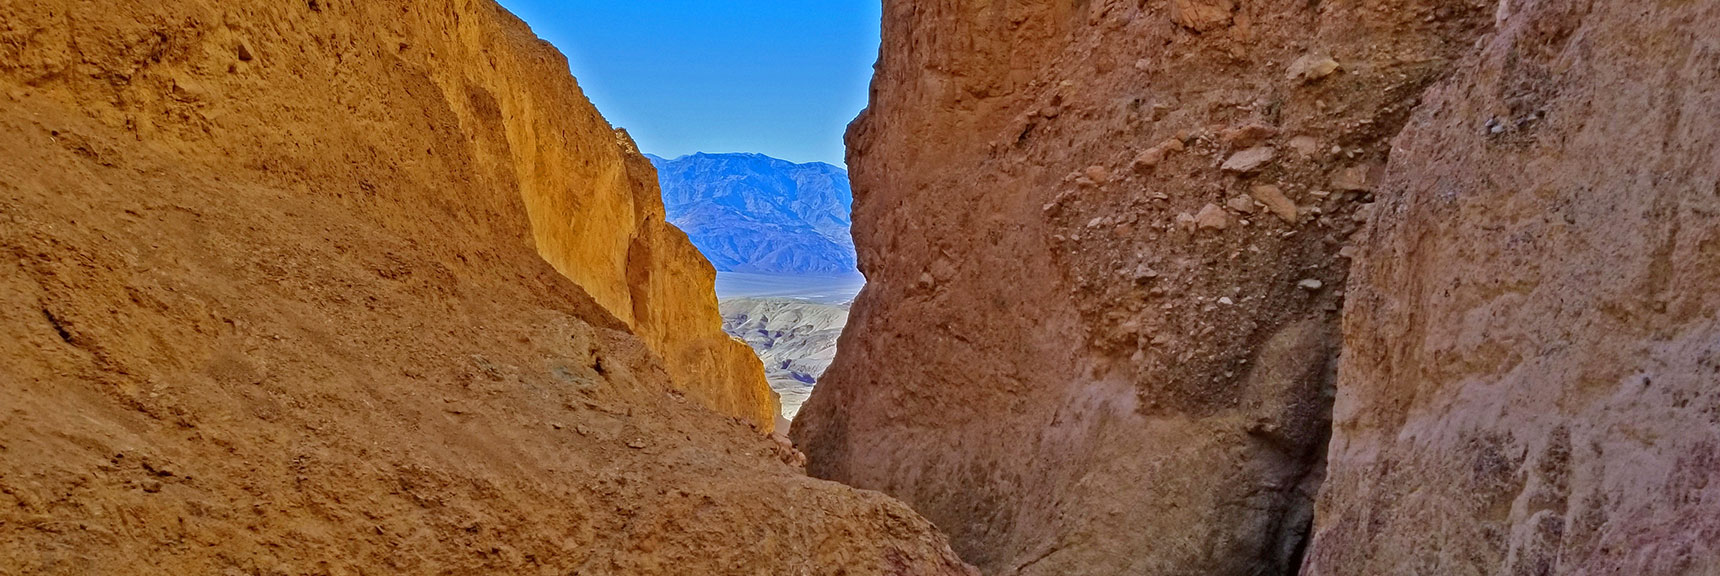 View Toward the Opening of First Dip Canyon | Artists Drive Hidden Canyon Hikes | Death Valley National Park, California